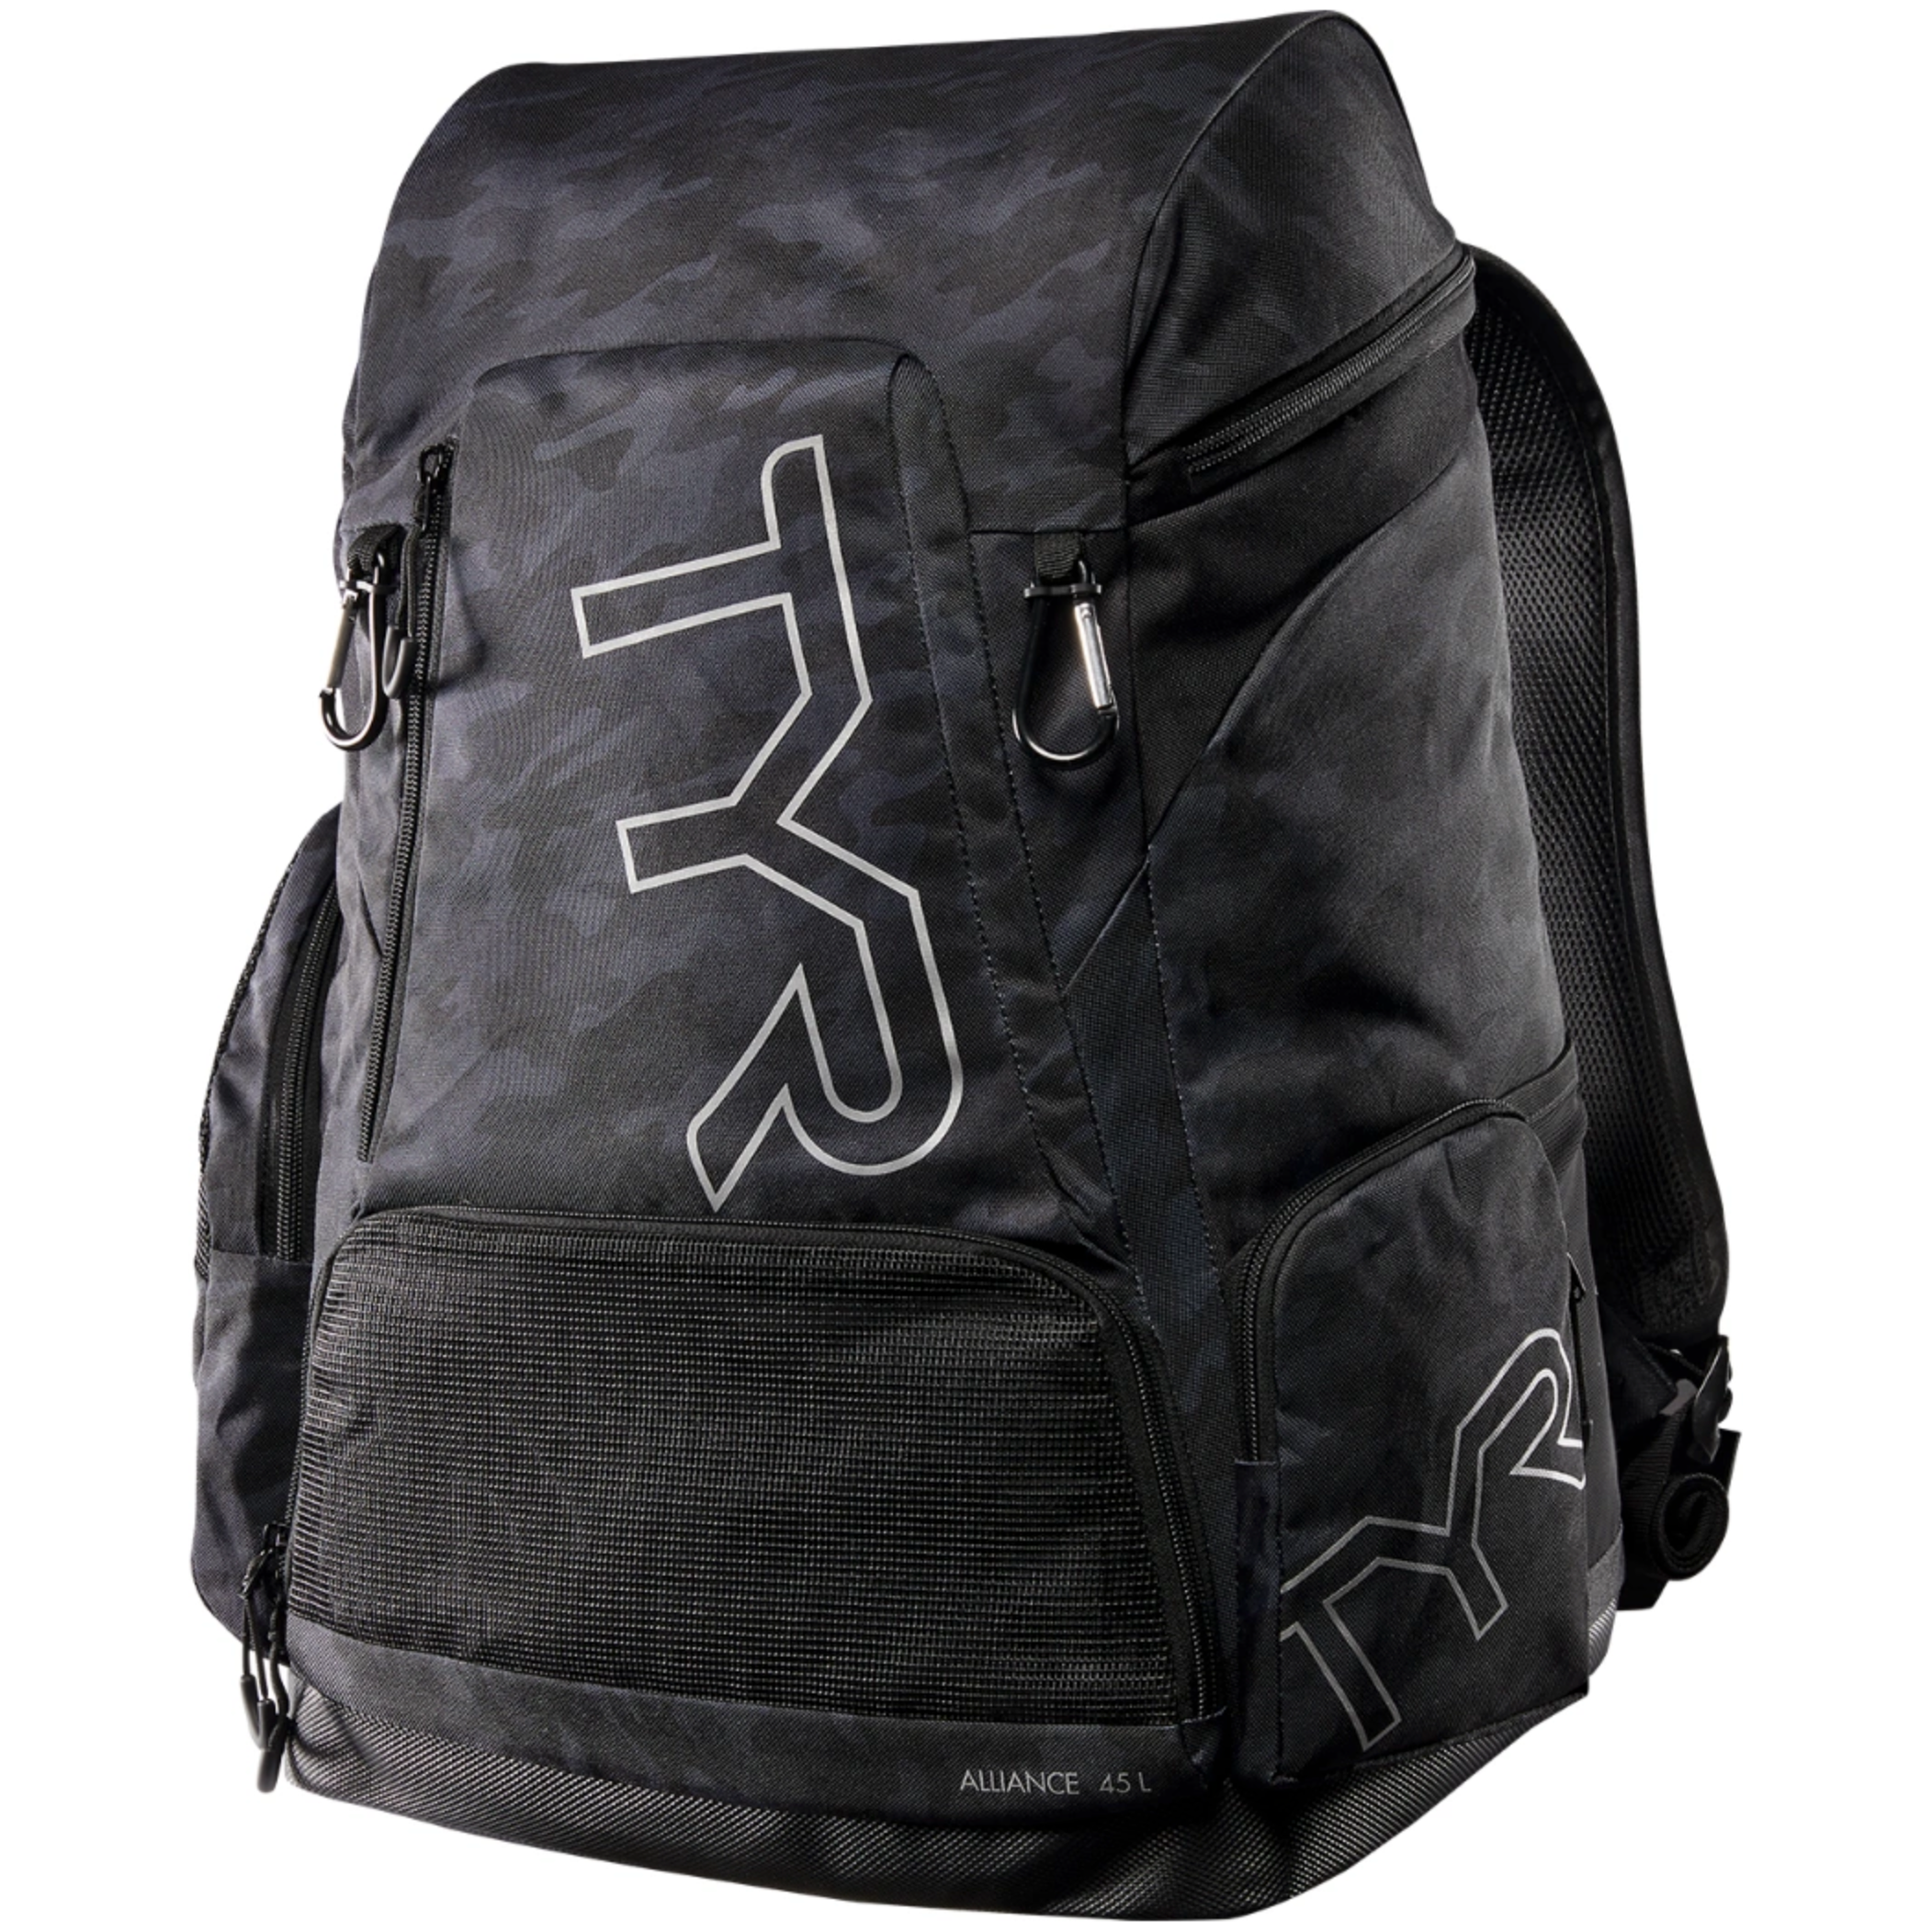 TYR Alliance 45L Printed Backpack